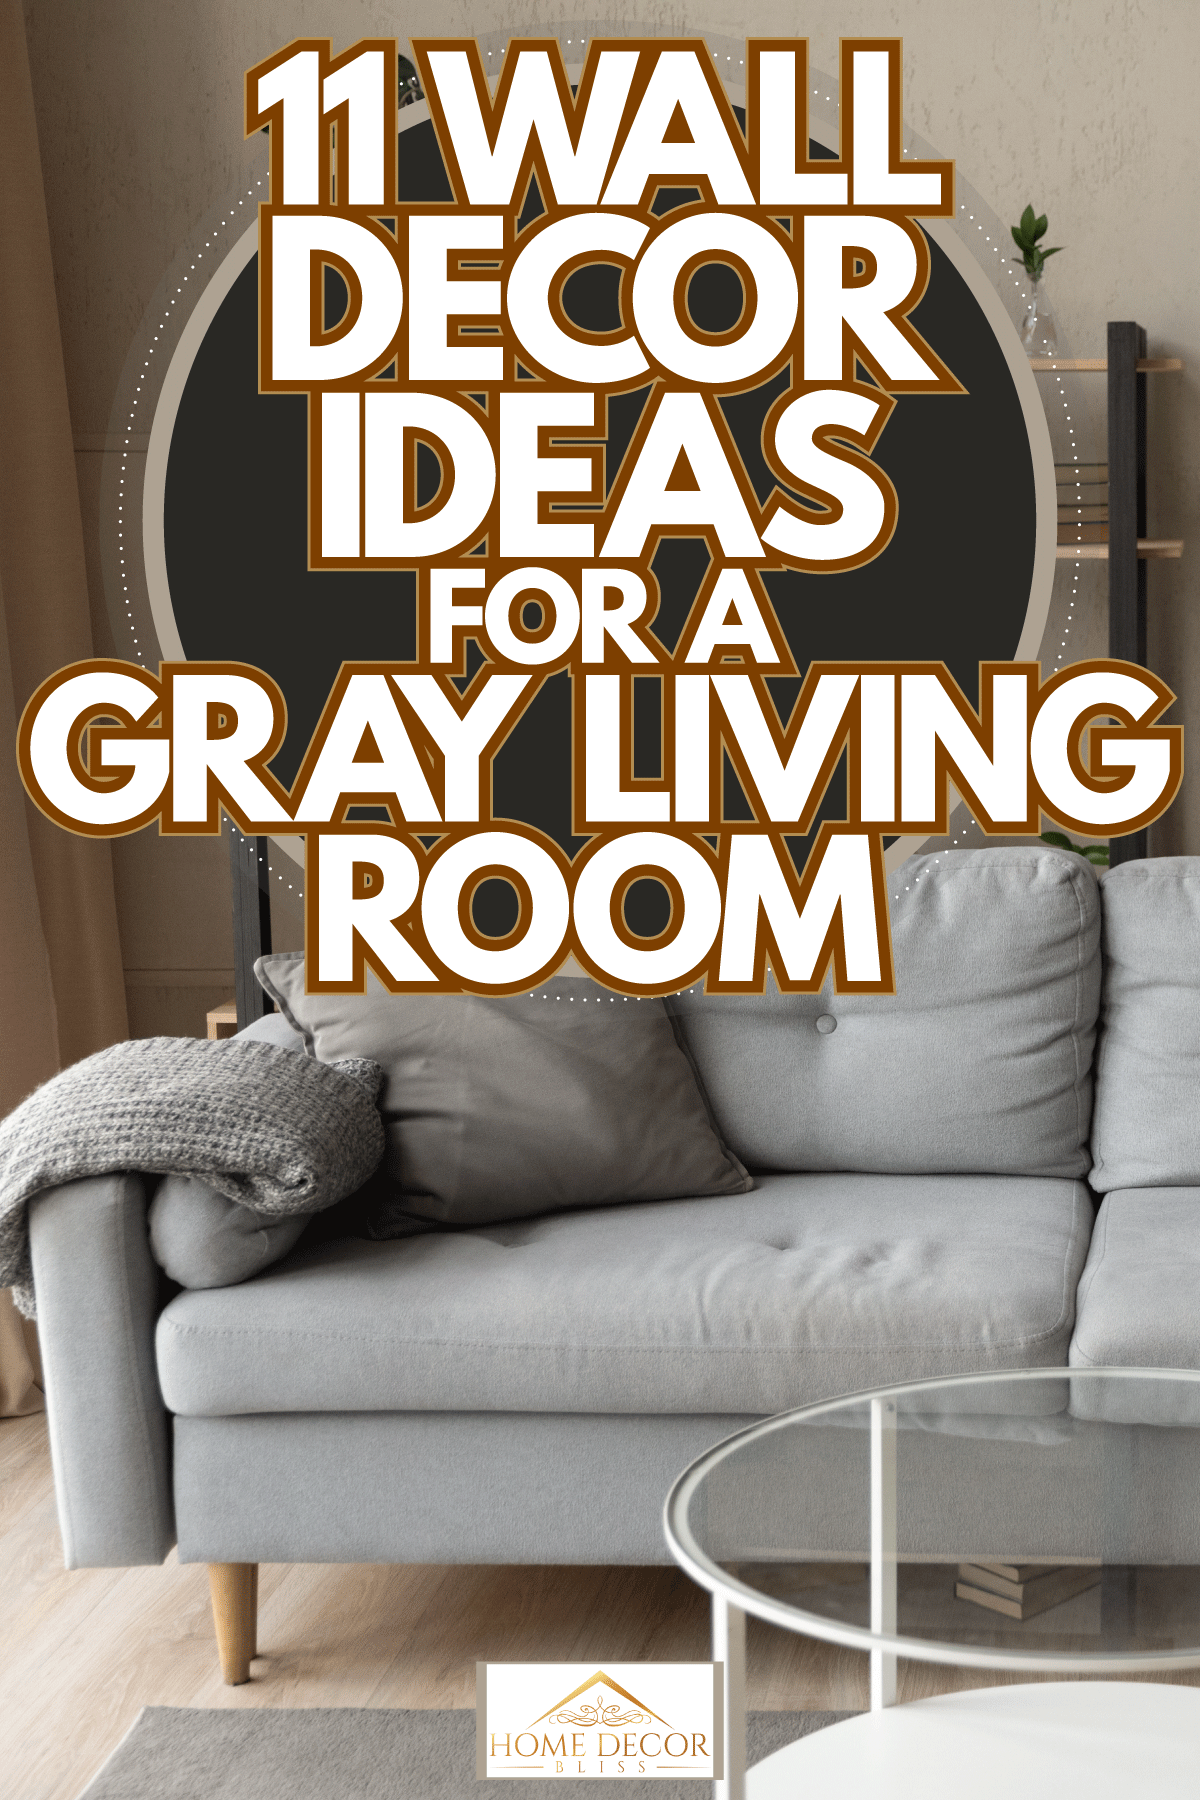 Gray sofa with patterned throw pillows with a minimalist designed cabinet, 11 Wall Decor Ideas For A Gray Living Room